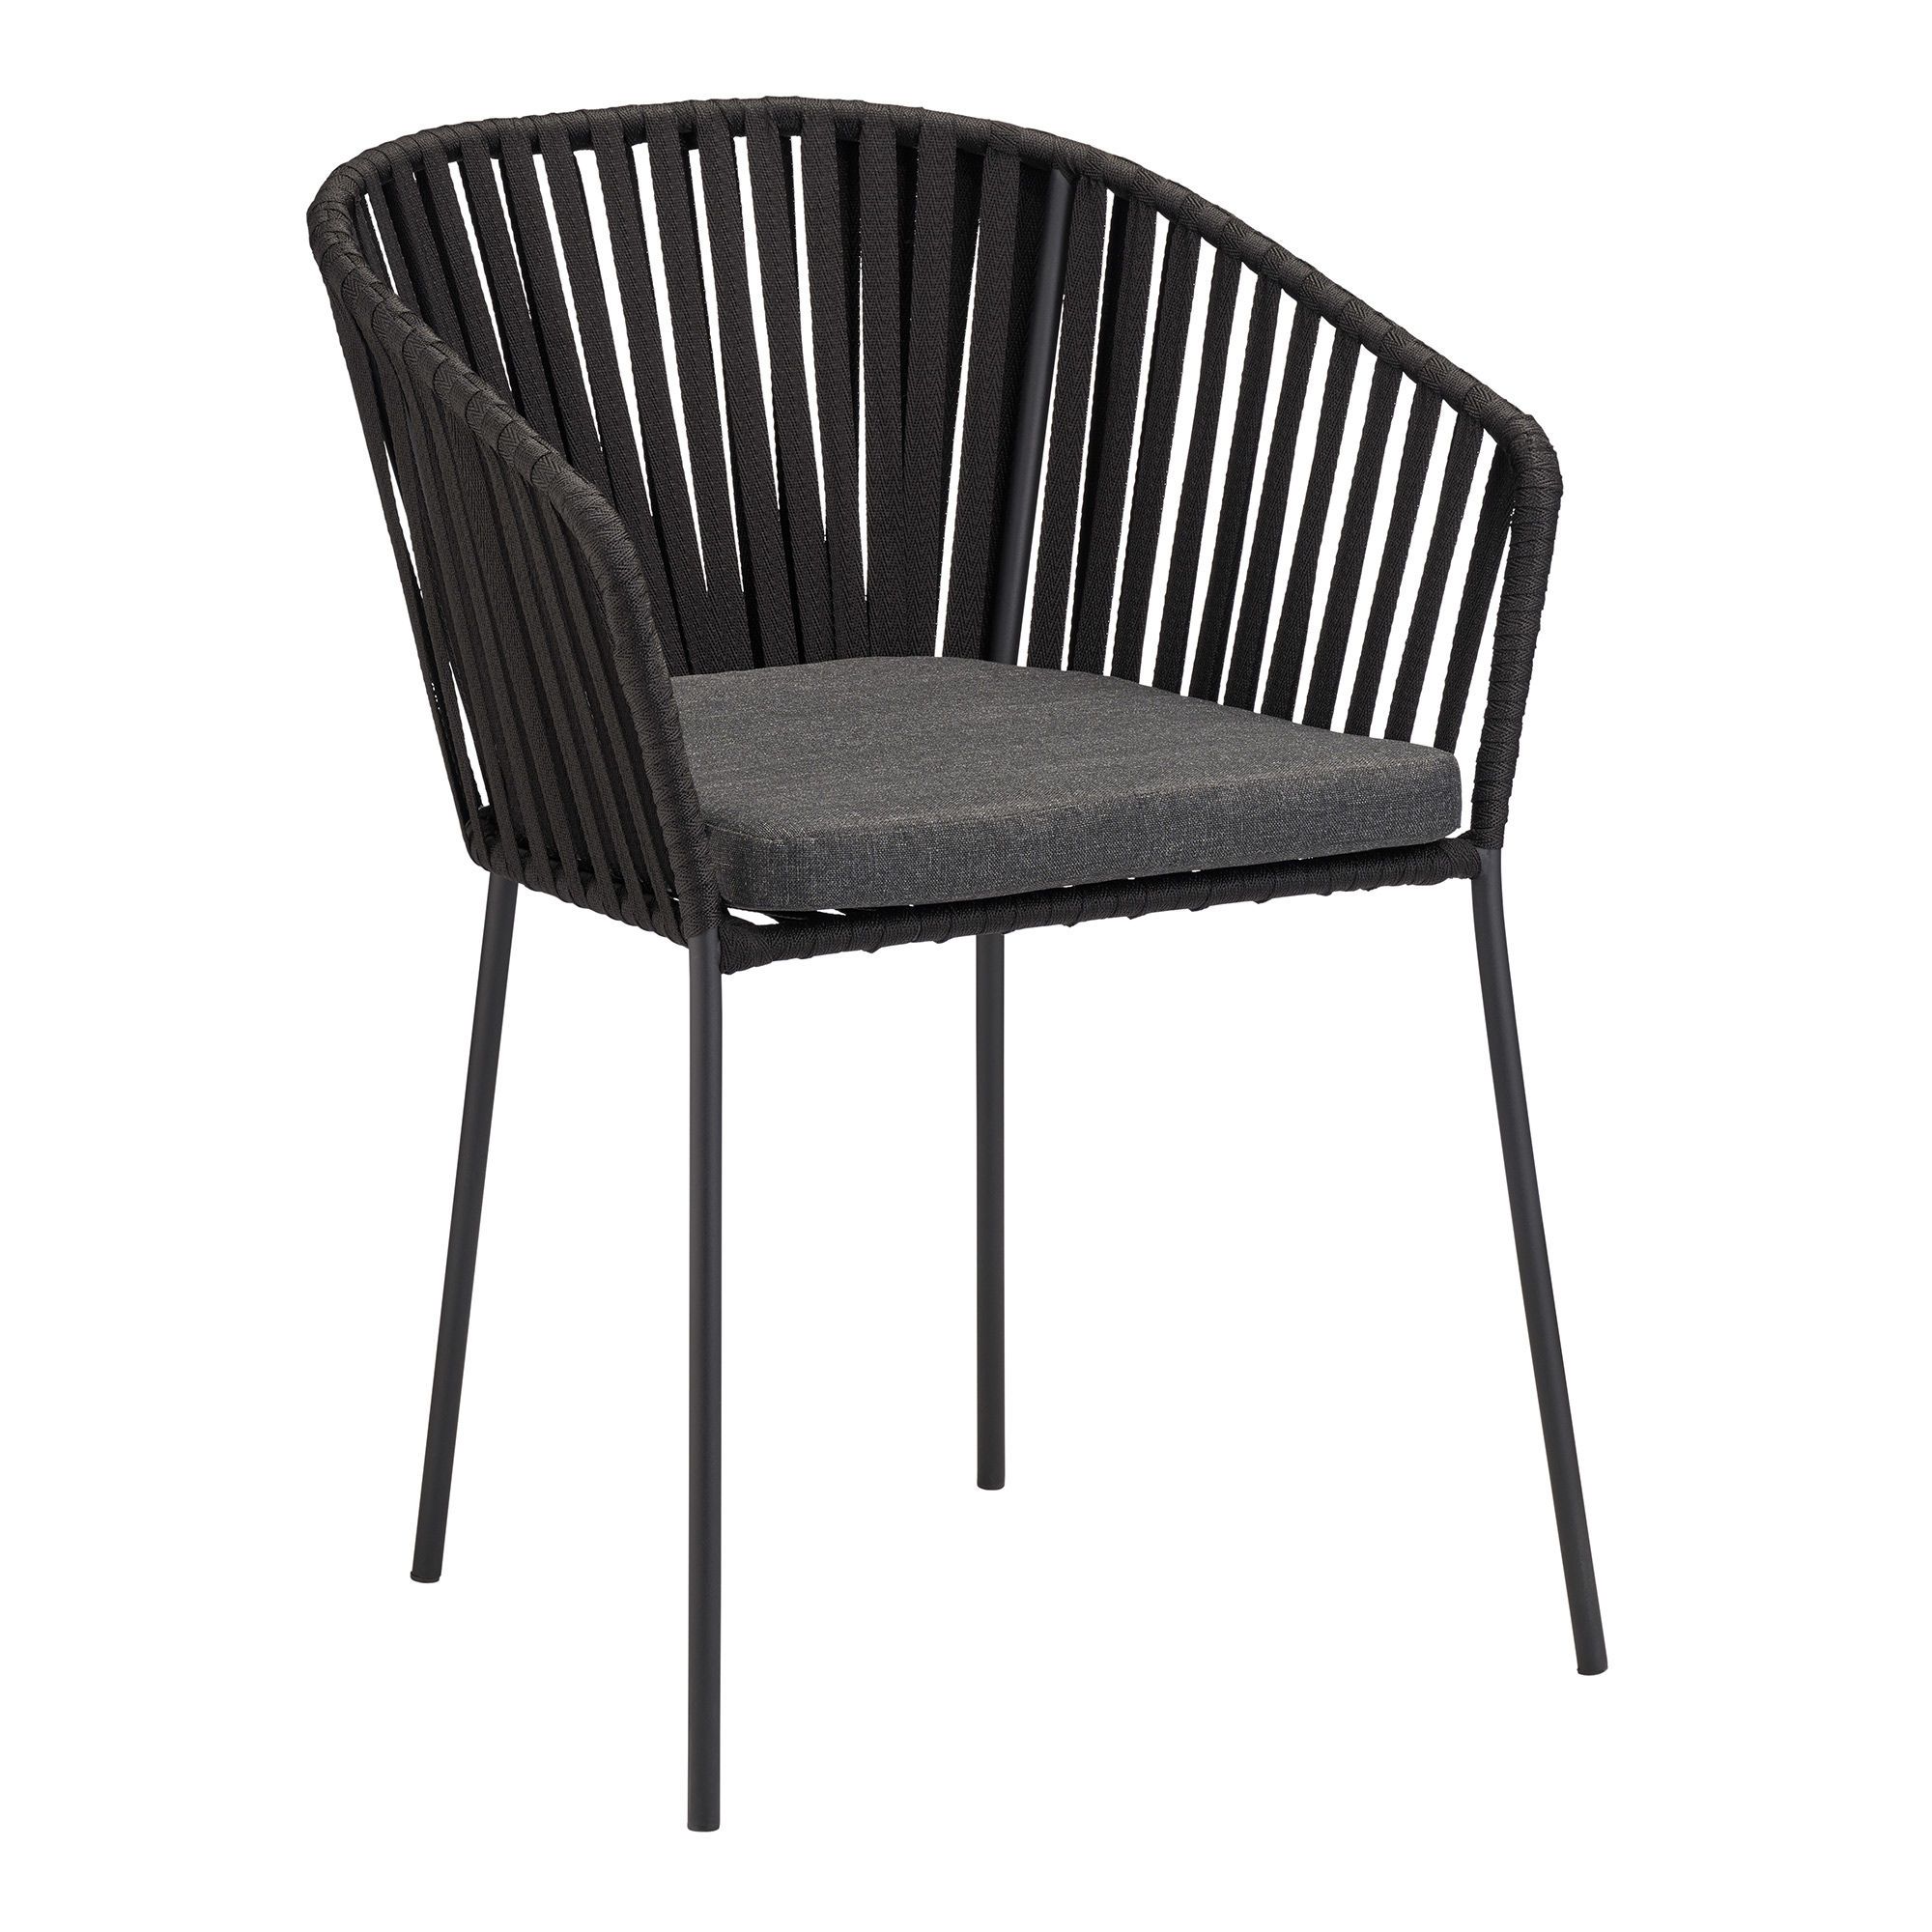 Outdoor Rope Chair - Black from OPAZ